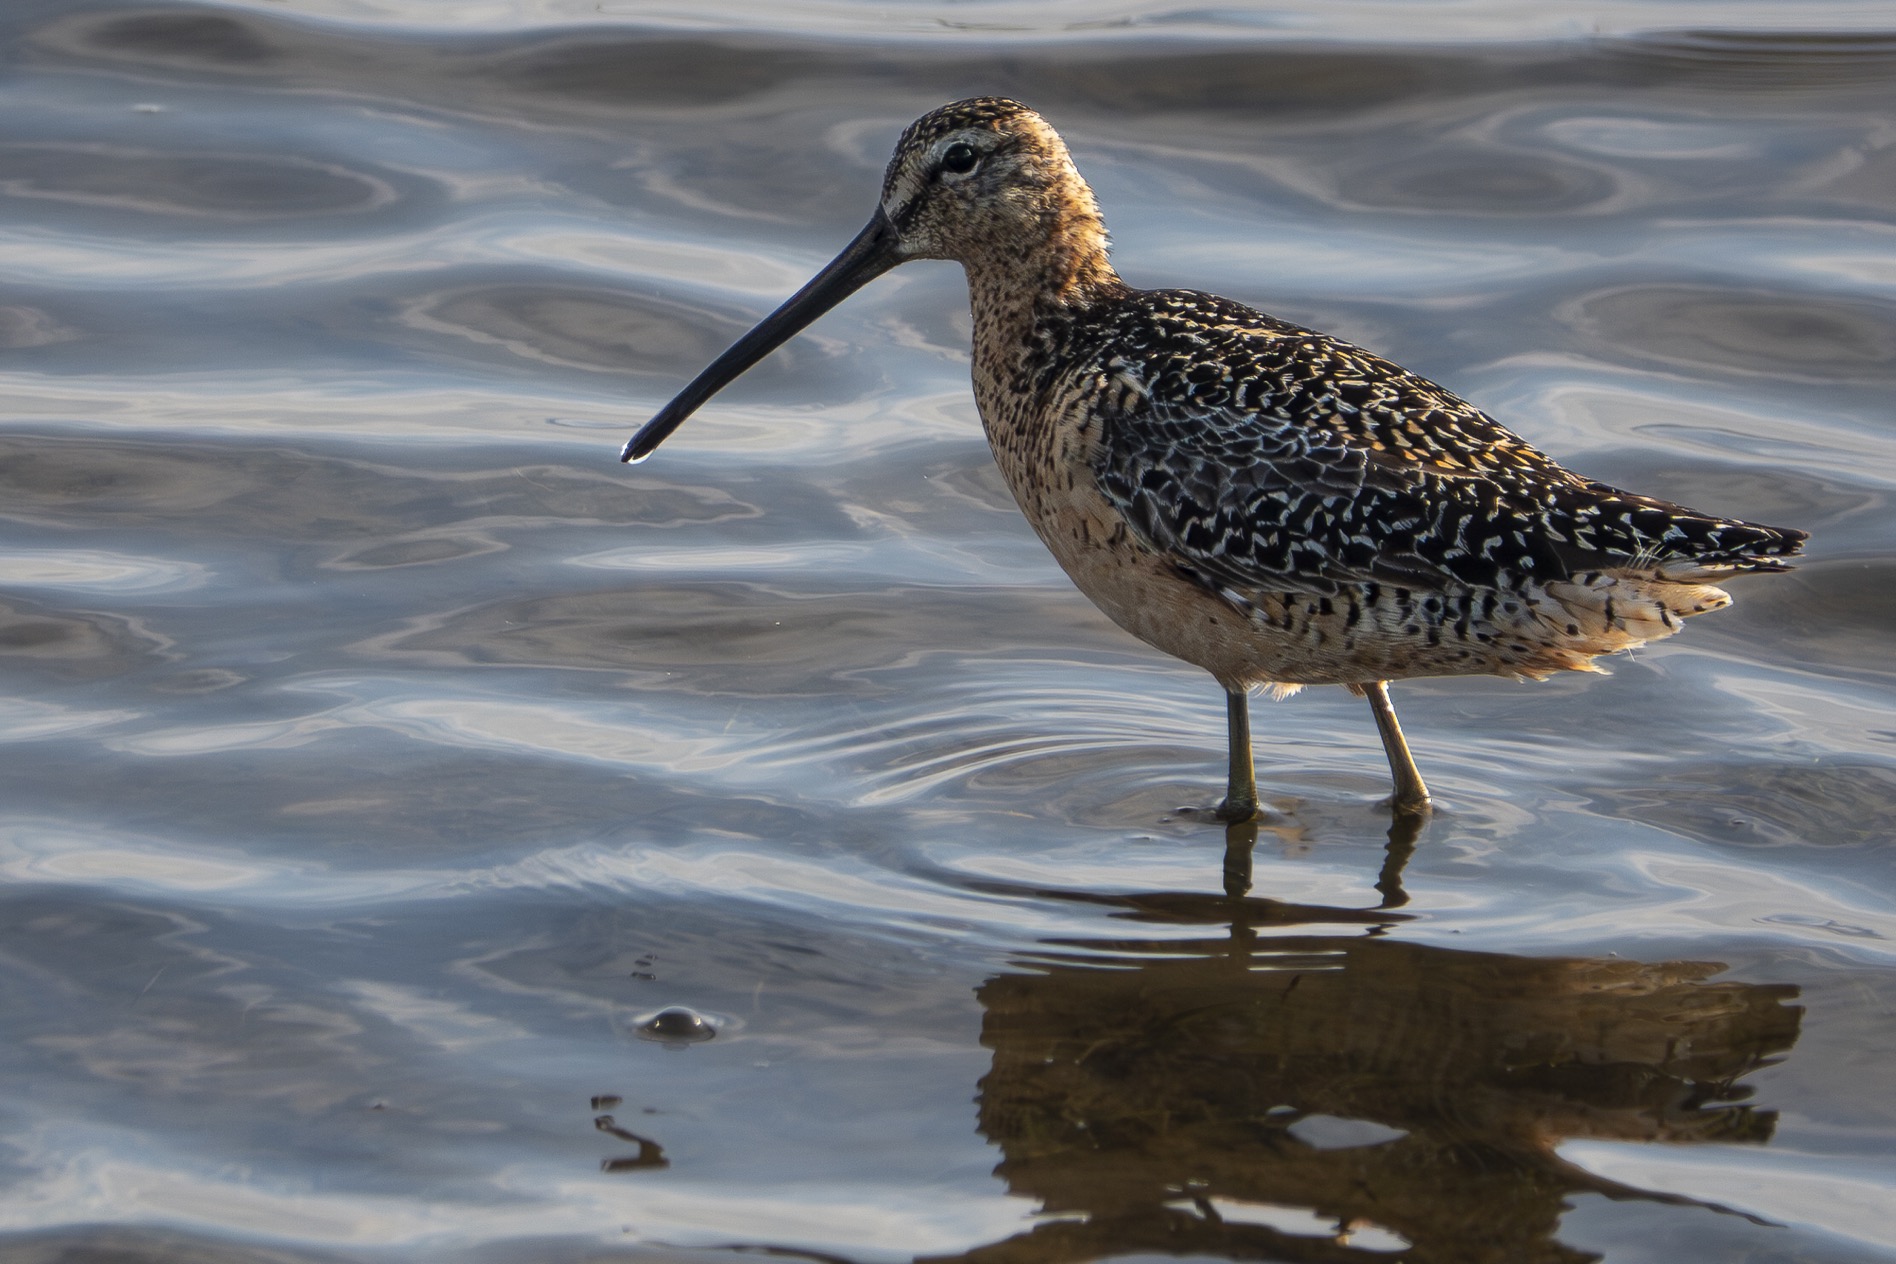 A Long-billed Dowitcher at RSPB Leighton Moss